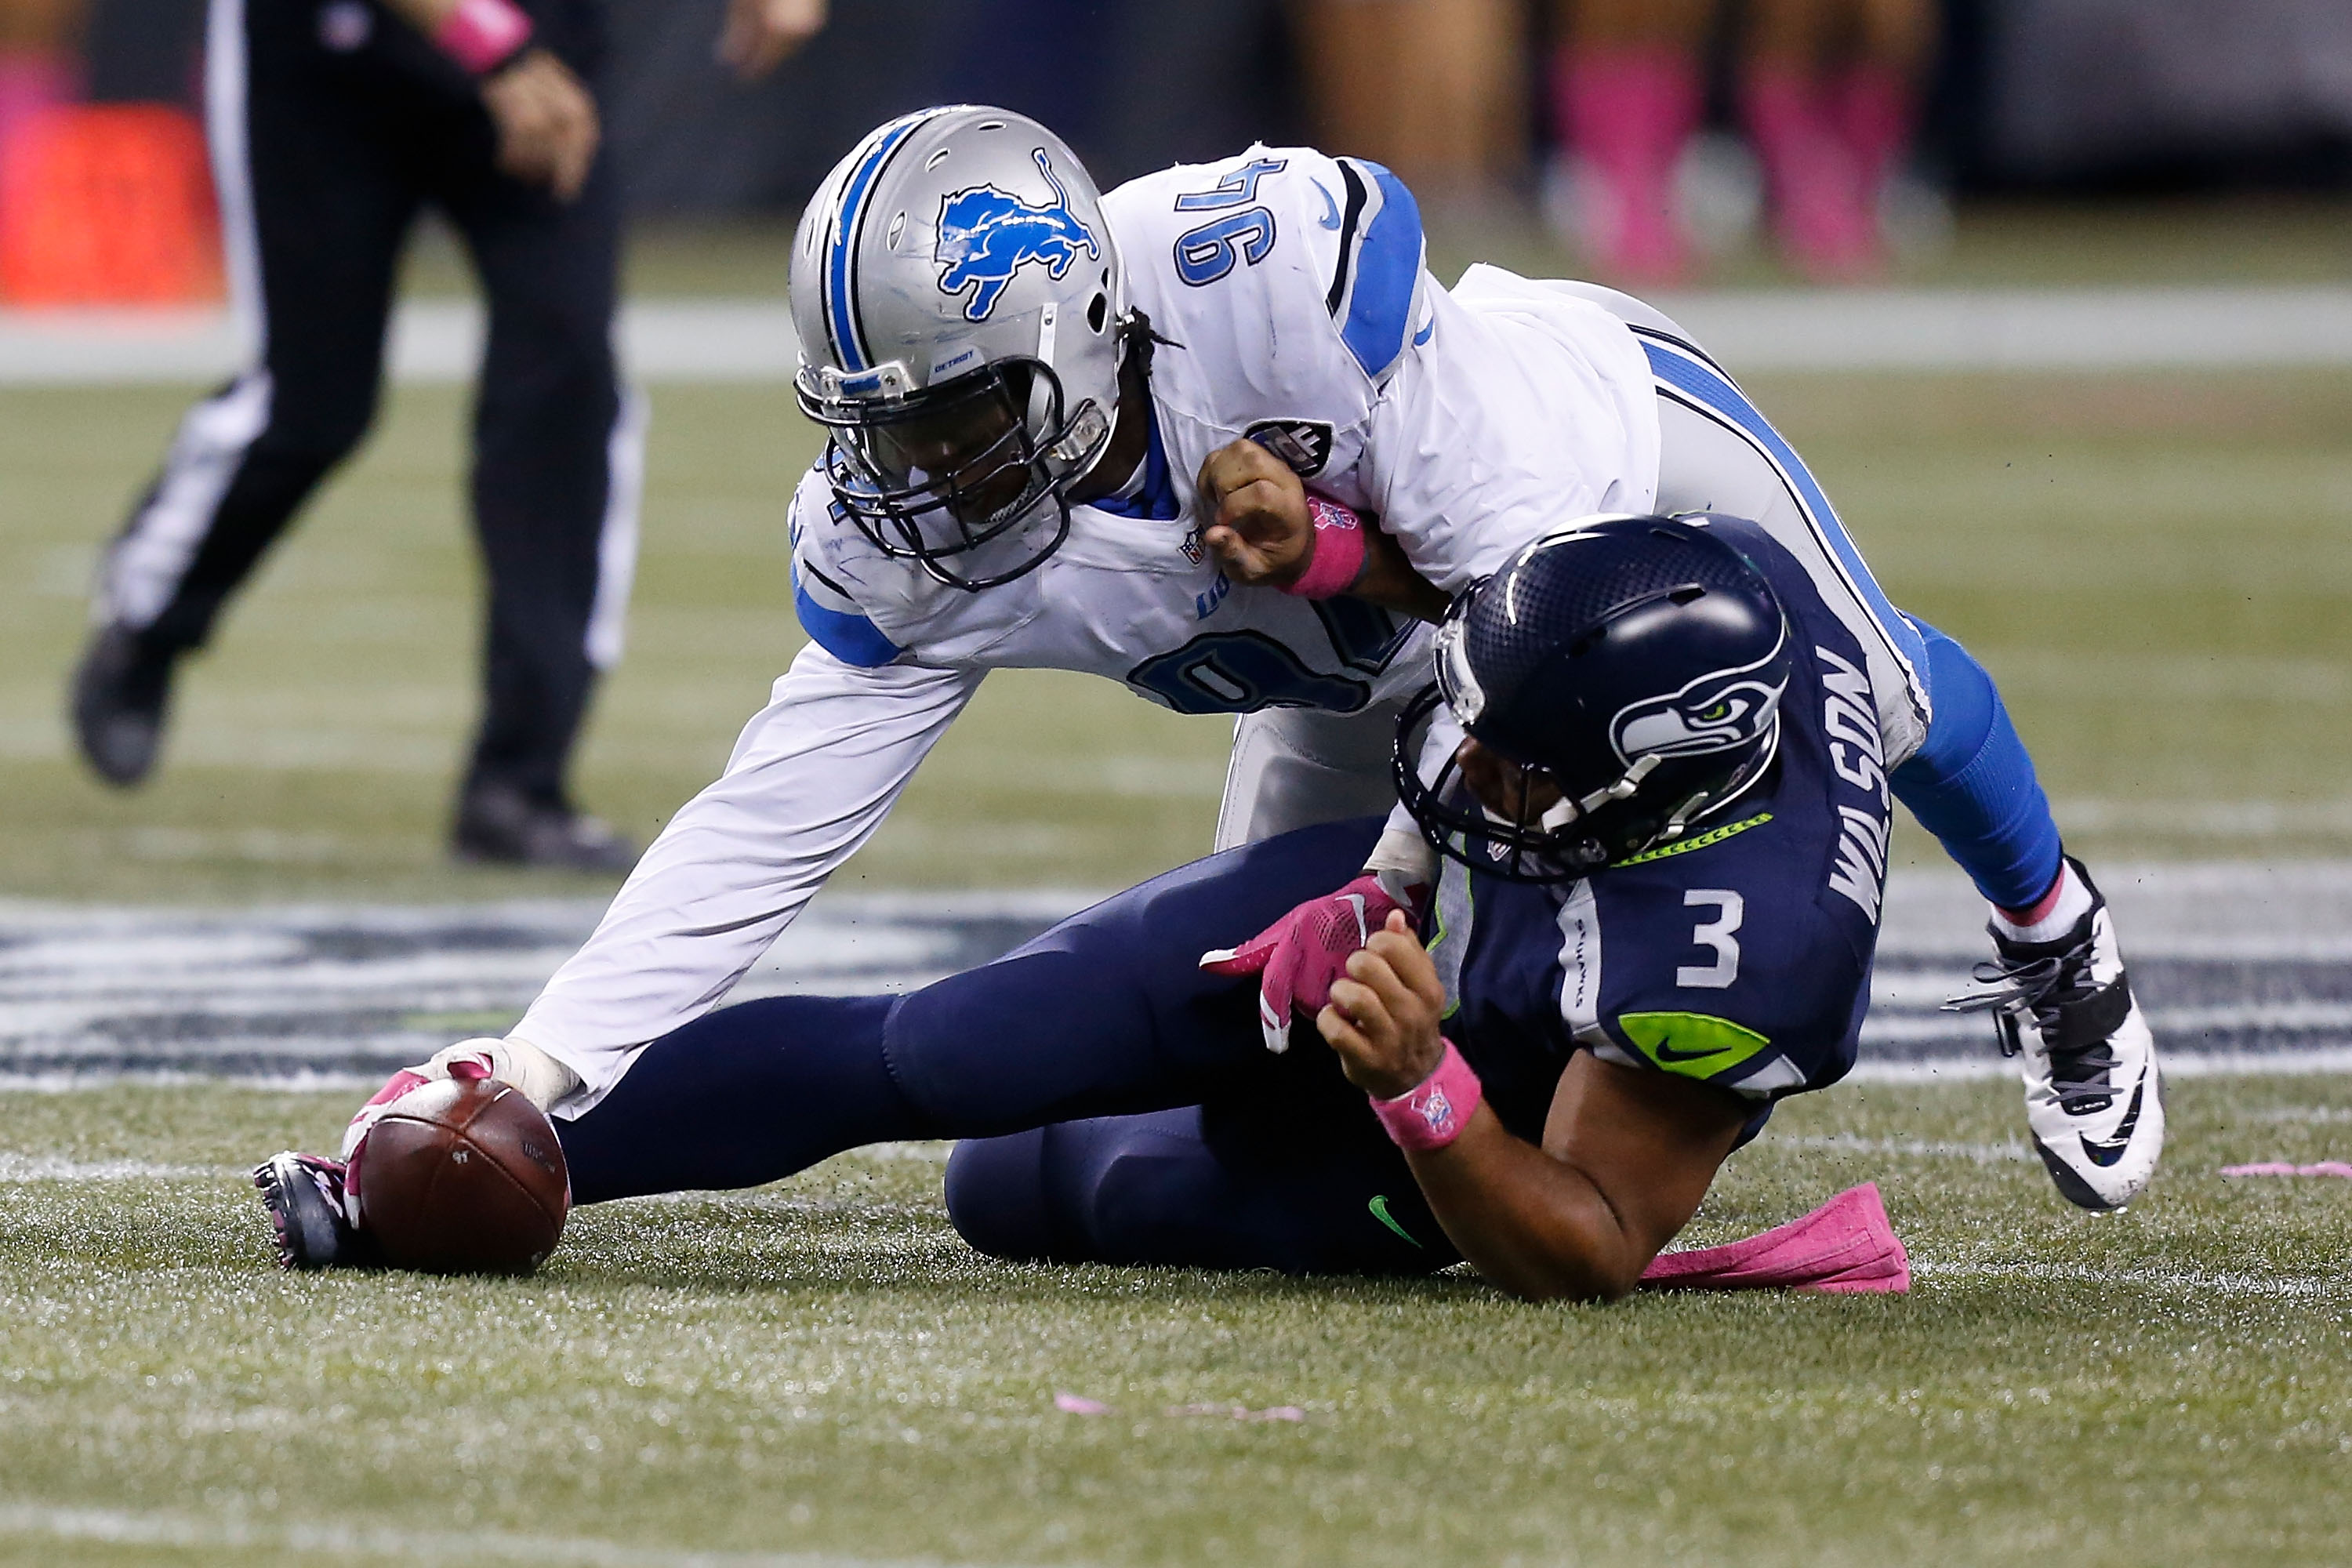 Lions vs. Seahawks Scores, Stats & Wild Card Highlights